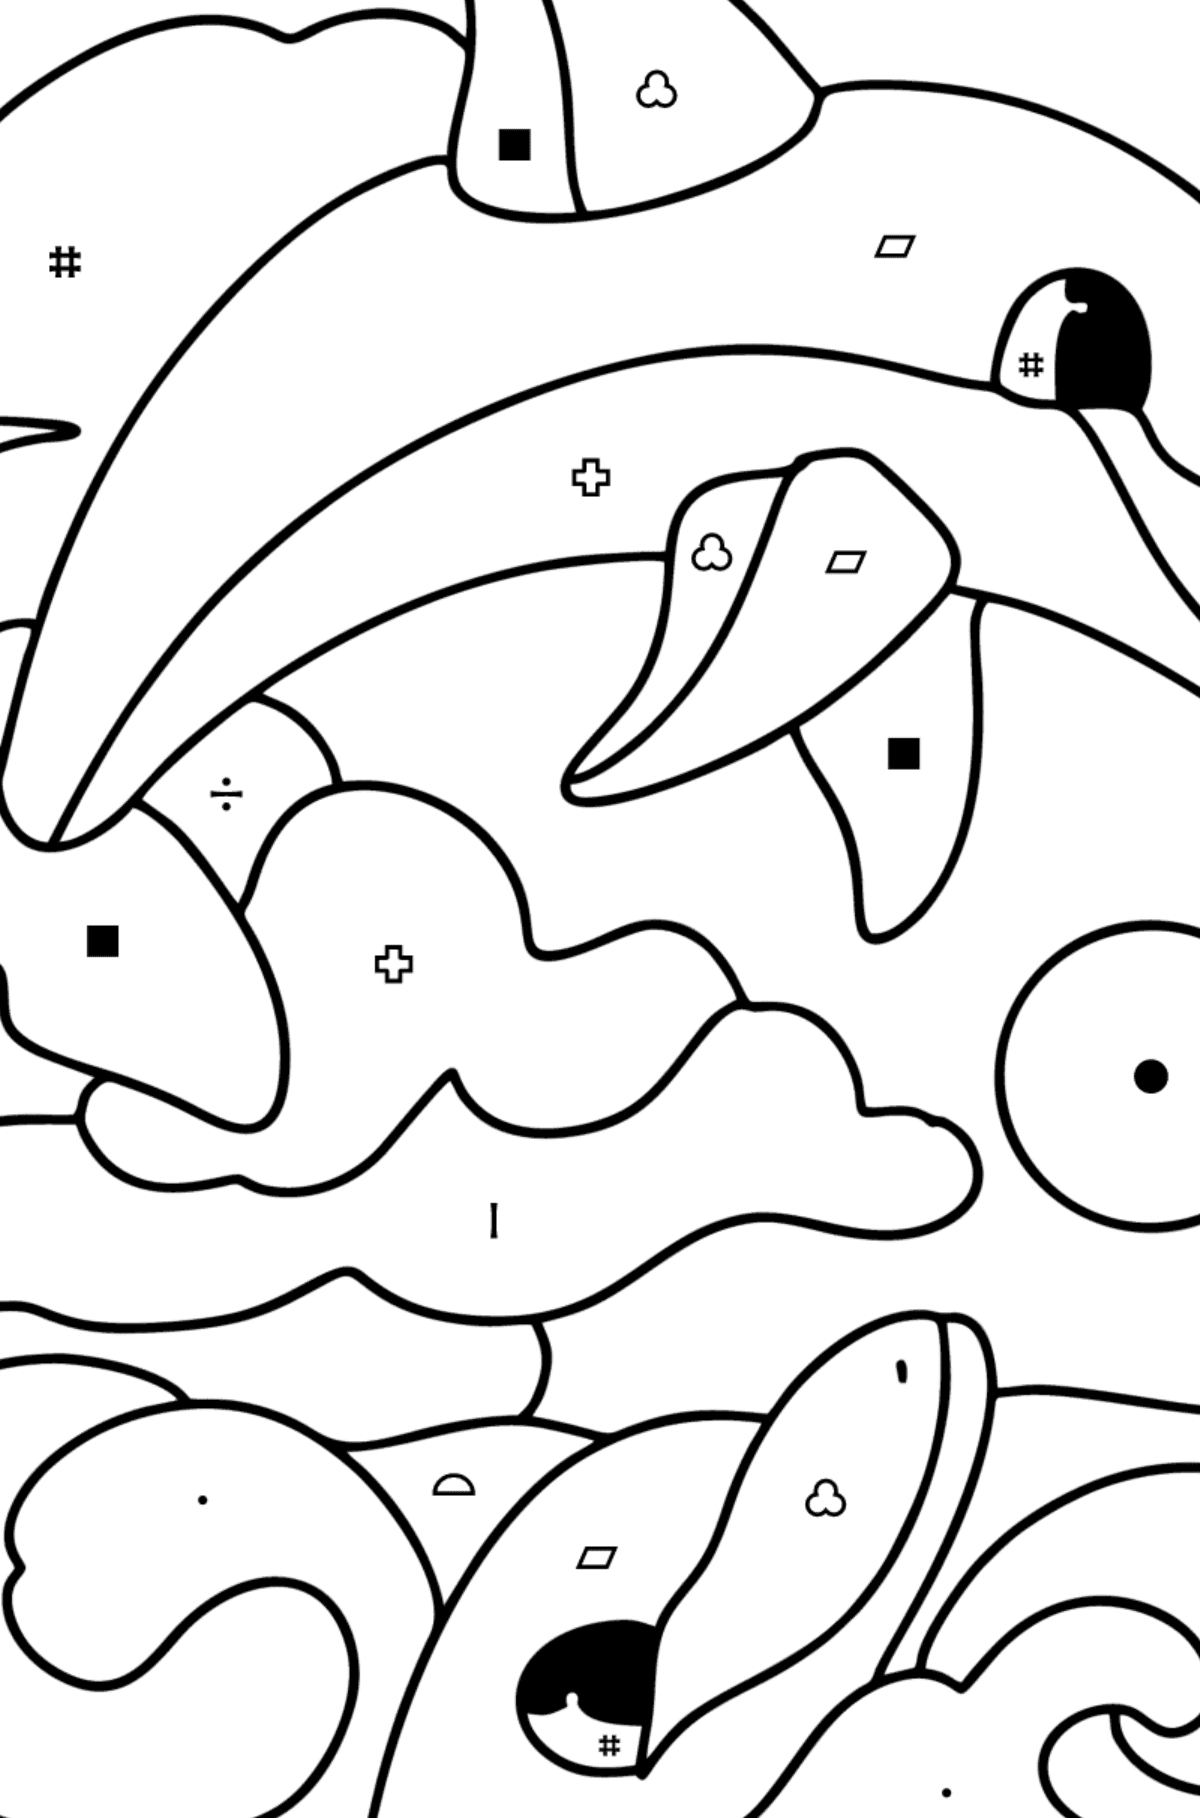 Dolphins coloring page - Coloring by Symbols and Geometric Shapes for Kids